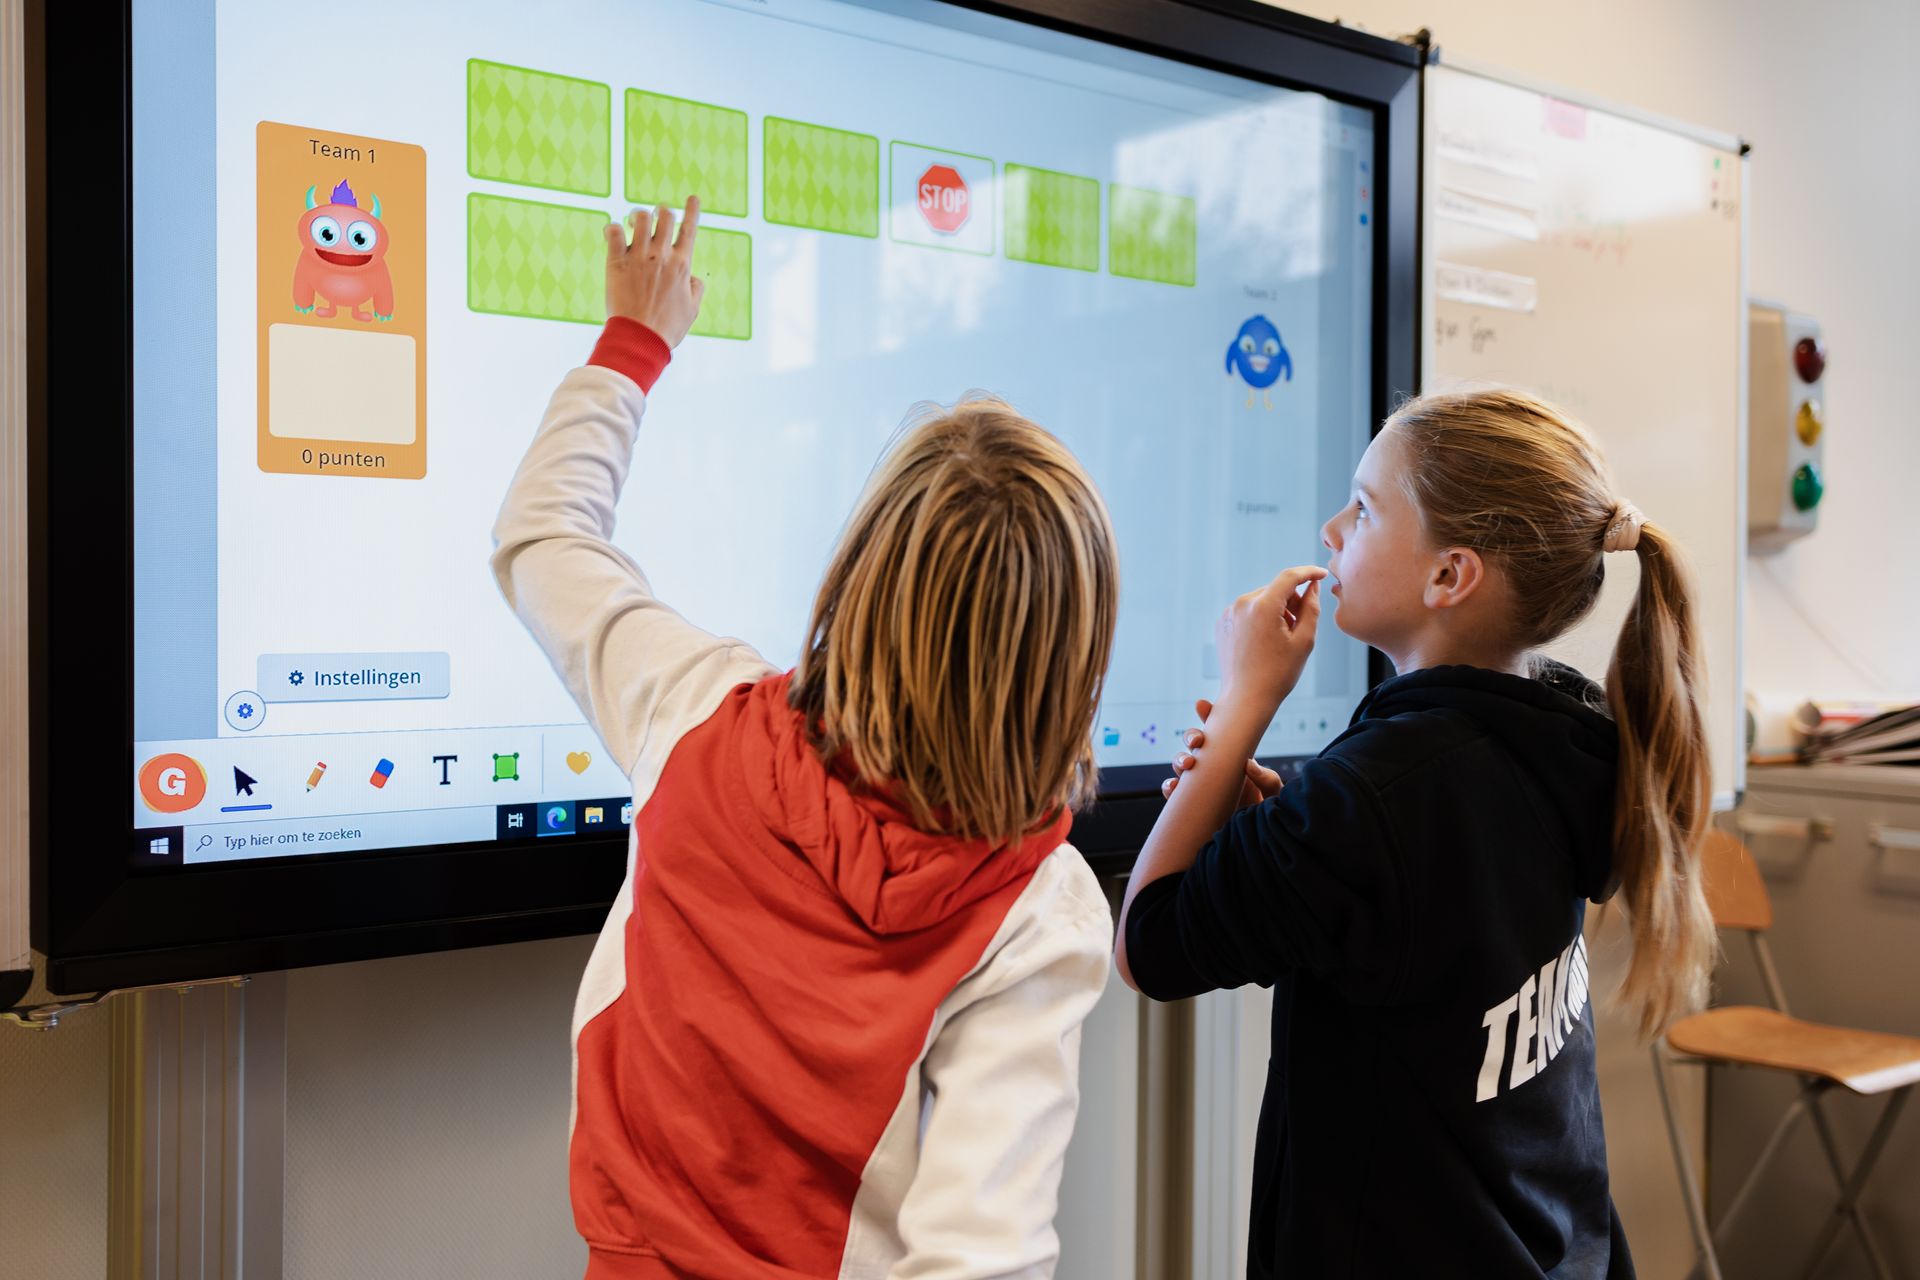 liven-up-your-classroom-with-gynzy-s-smartboard-games-activities